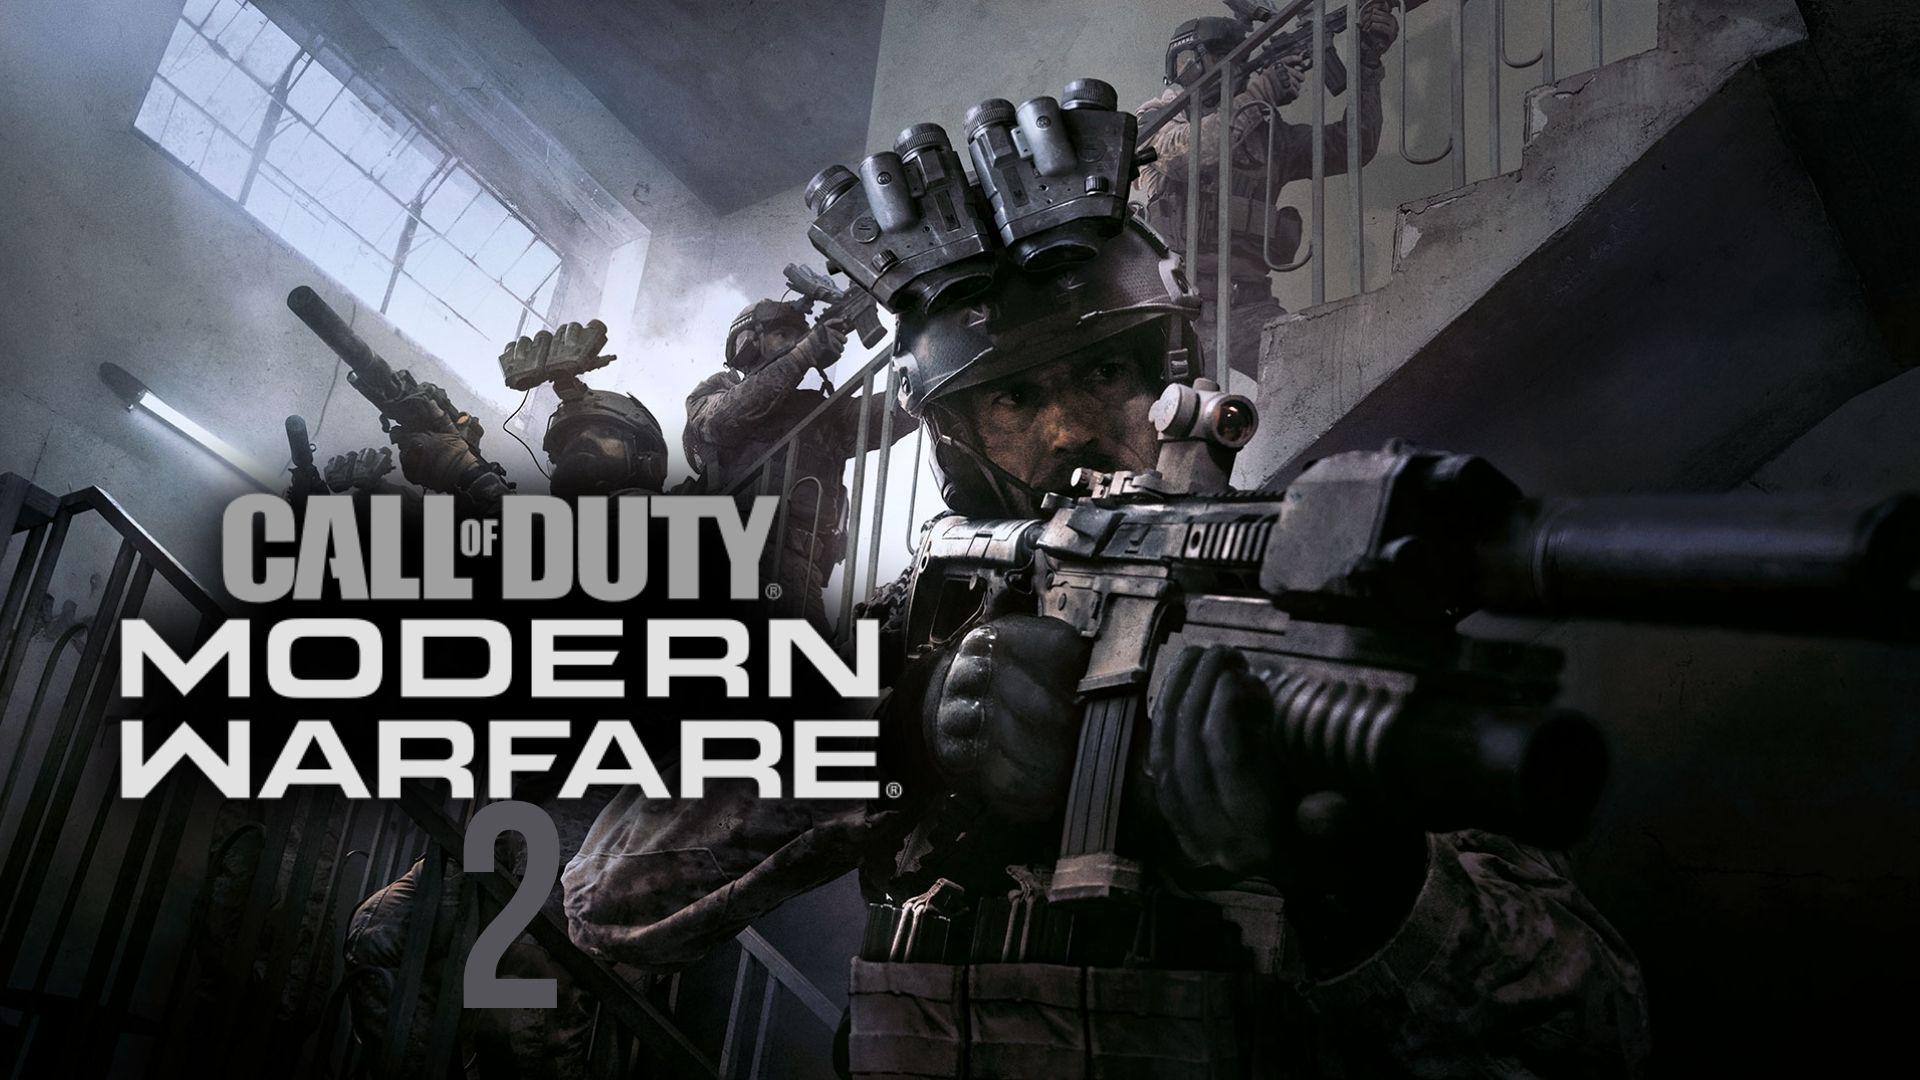 Call of Duty: Morden Warfare 2 to Receive Campaign DLC in 2023